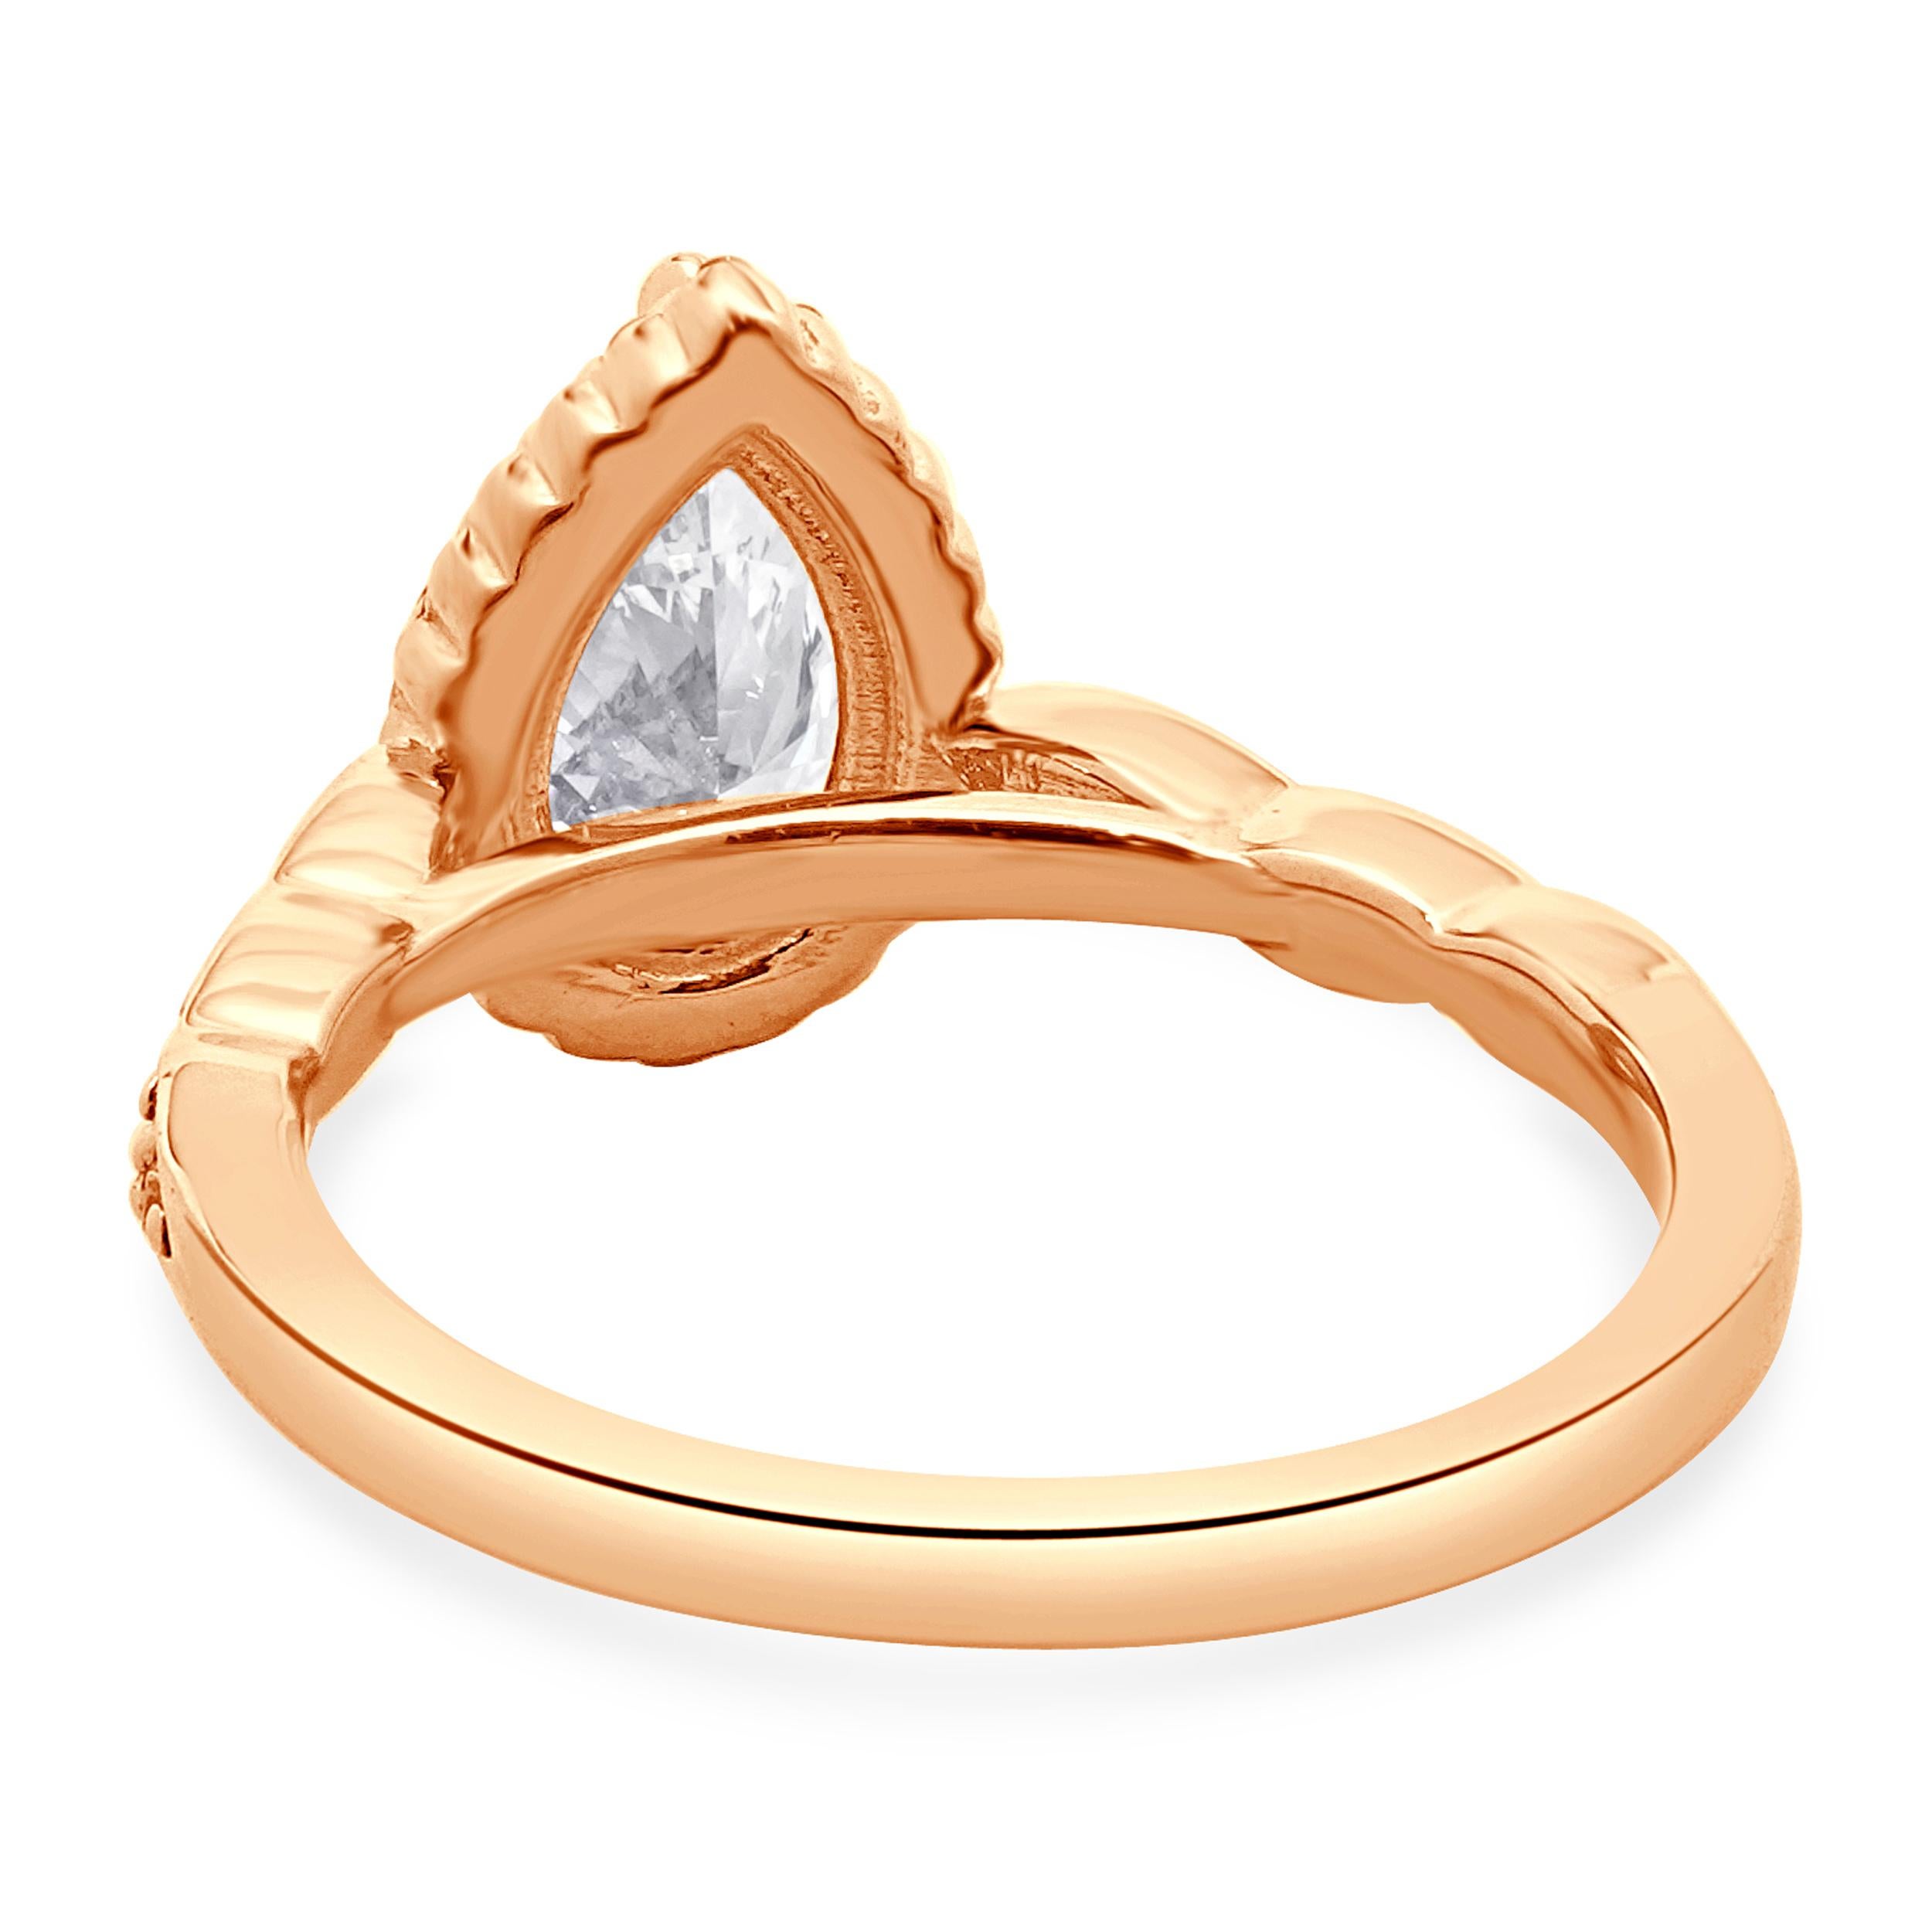 14k Rose Gold Pear Cut Diamond Engagement Ring In Excellent Condition For Sale In Scottsdale, AZ